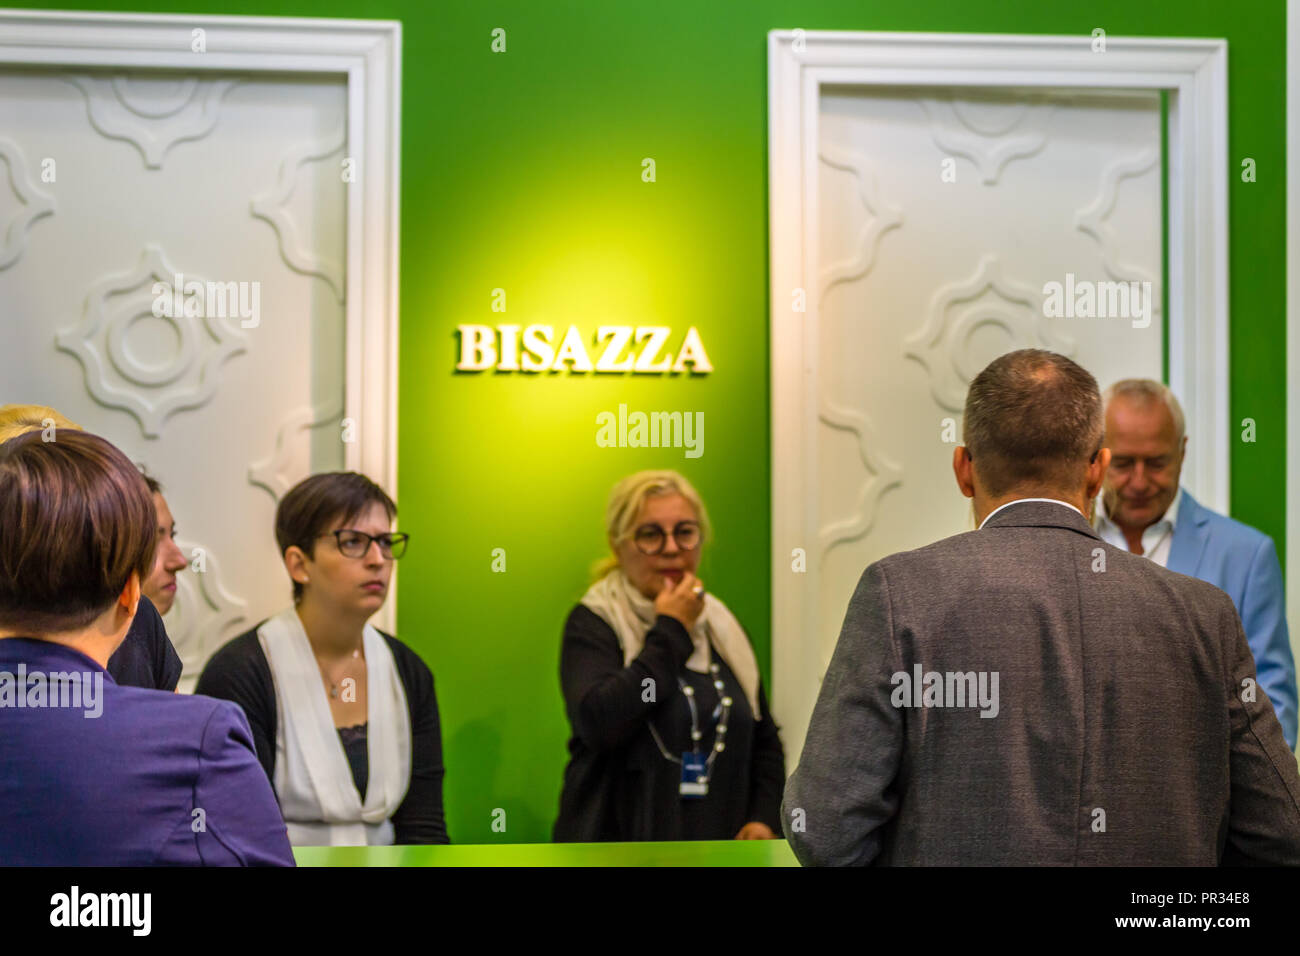 BOLOGNA (ITALY), SEPTEMBER 28, 2018: booth presenters informing visitors at CERSAIE, international exhibition of ceramic tile and bathroom furnishings Stock Photo